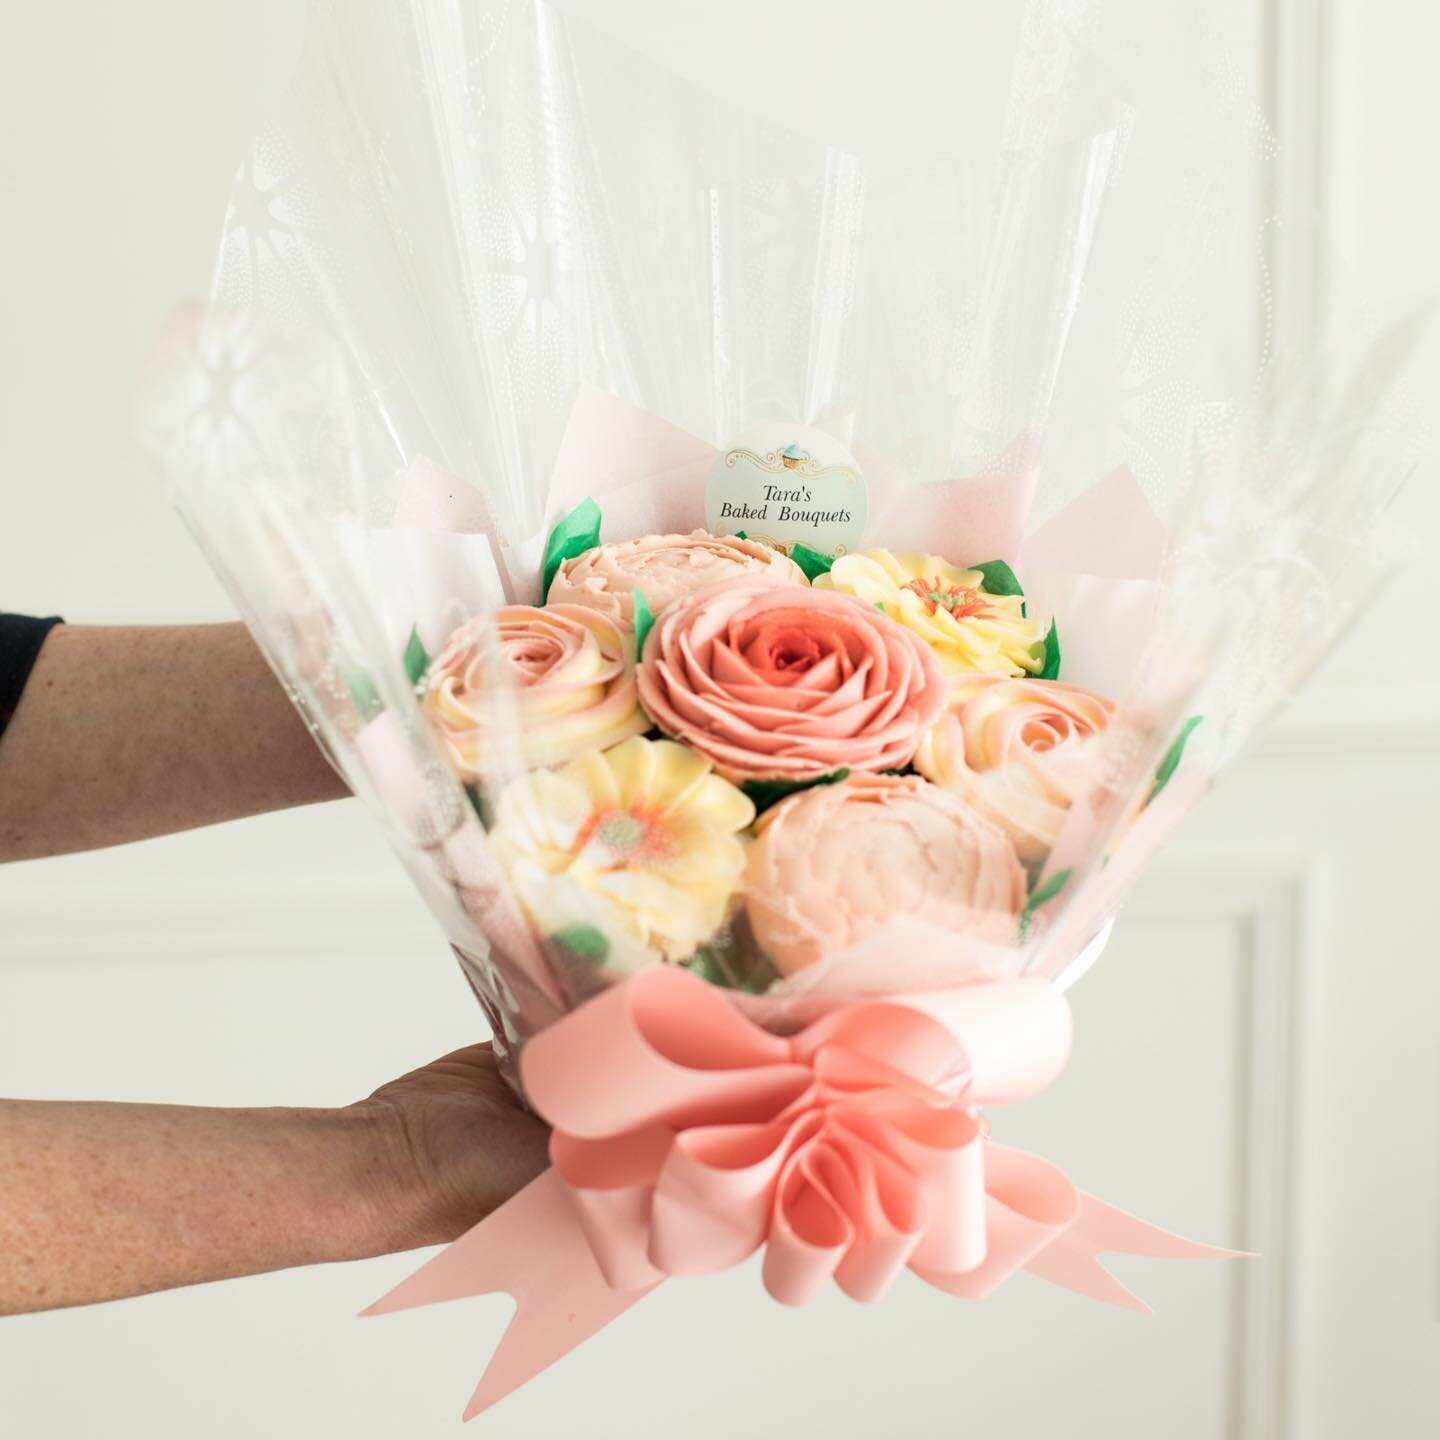 Perfect gift for visiting!
Now taking orders https://www.tarasbakedbouquets.ie/small-cupcake-bouquet #cupcakes #cupcakeflowerbouquets #cupcakeflowerbouquet #floralcupcakebouquet #floralcupcake #cupcakeflower #cupcakeflowers #tarasbakedbouquets #irish